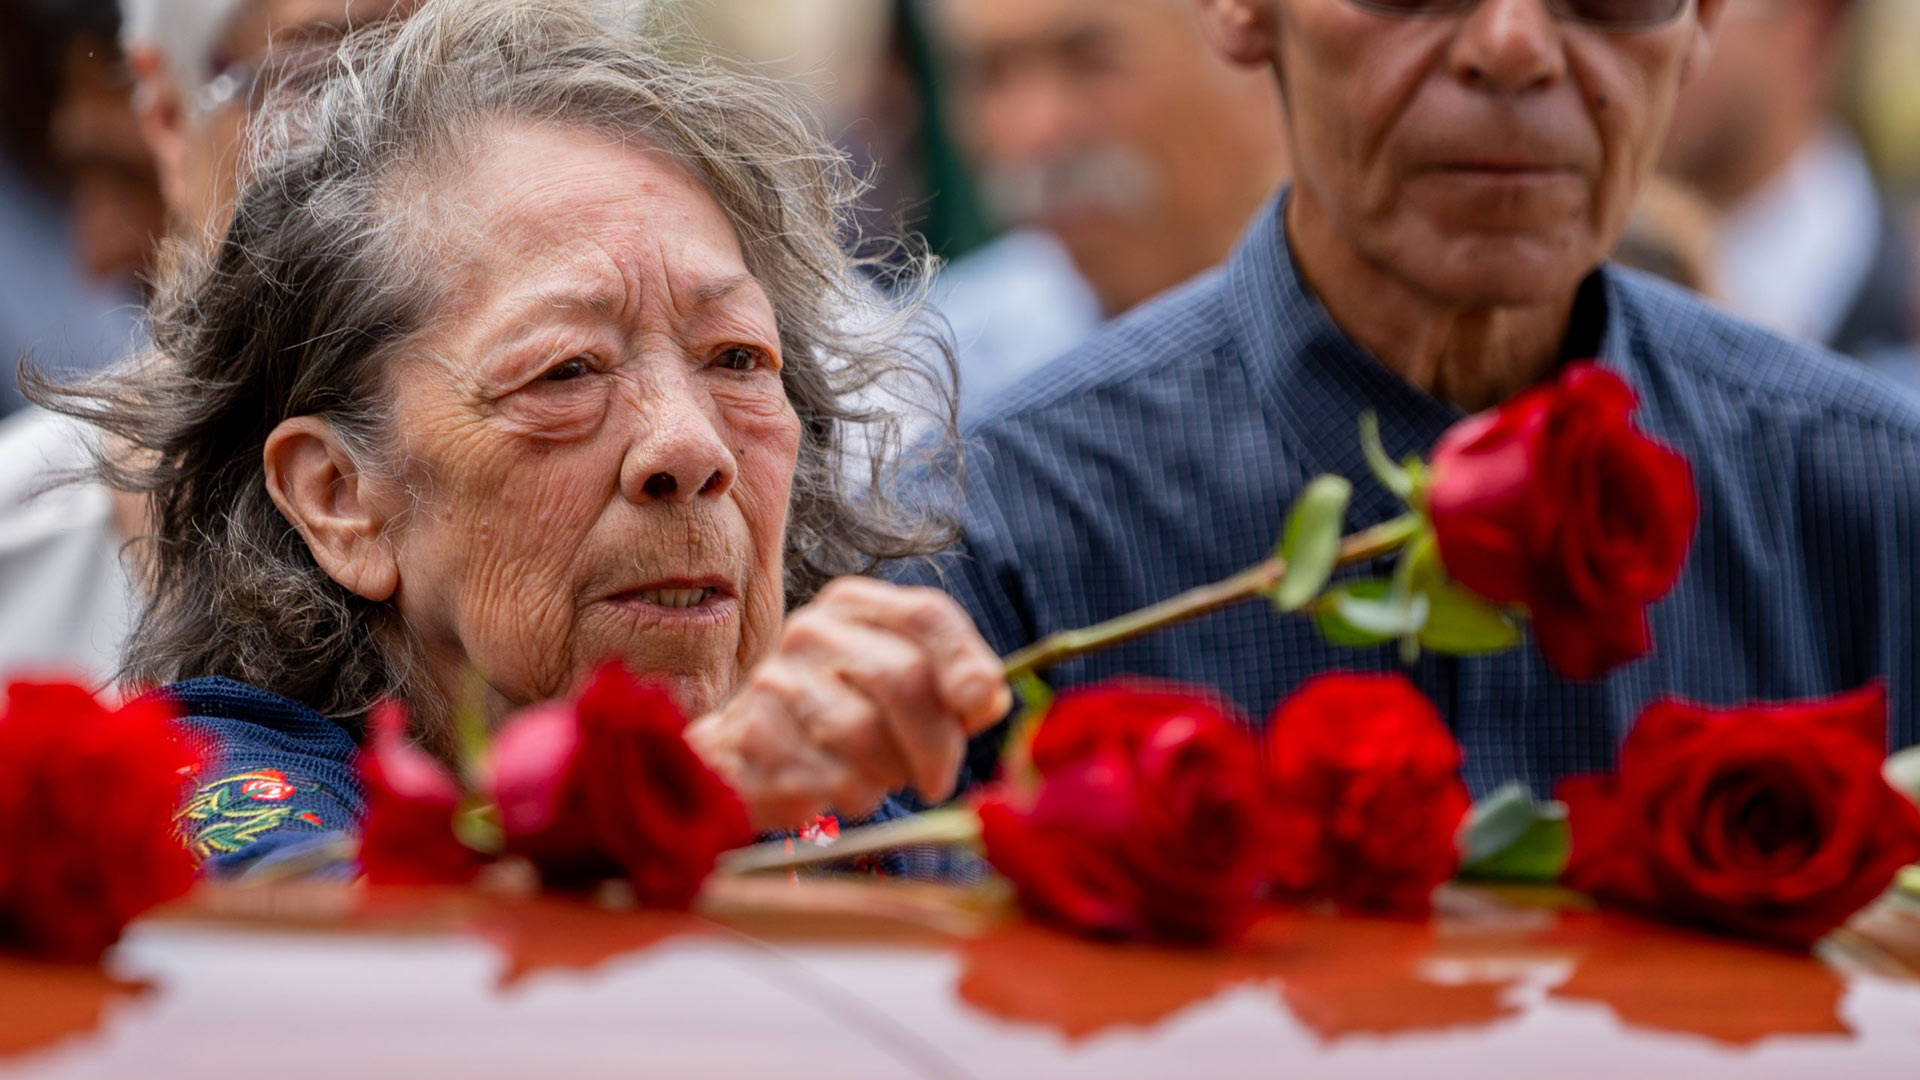 Connie Cintron places a red rose on the casket of her brother, Pvt. Felix Yanez, at South Lawn Cemetery in Tucson on Sept. 3, 2022.